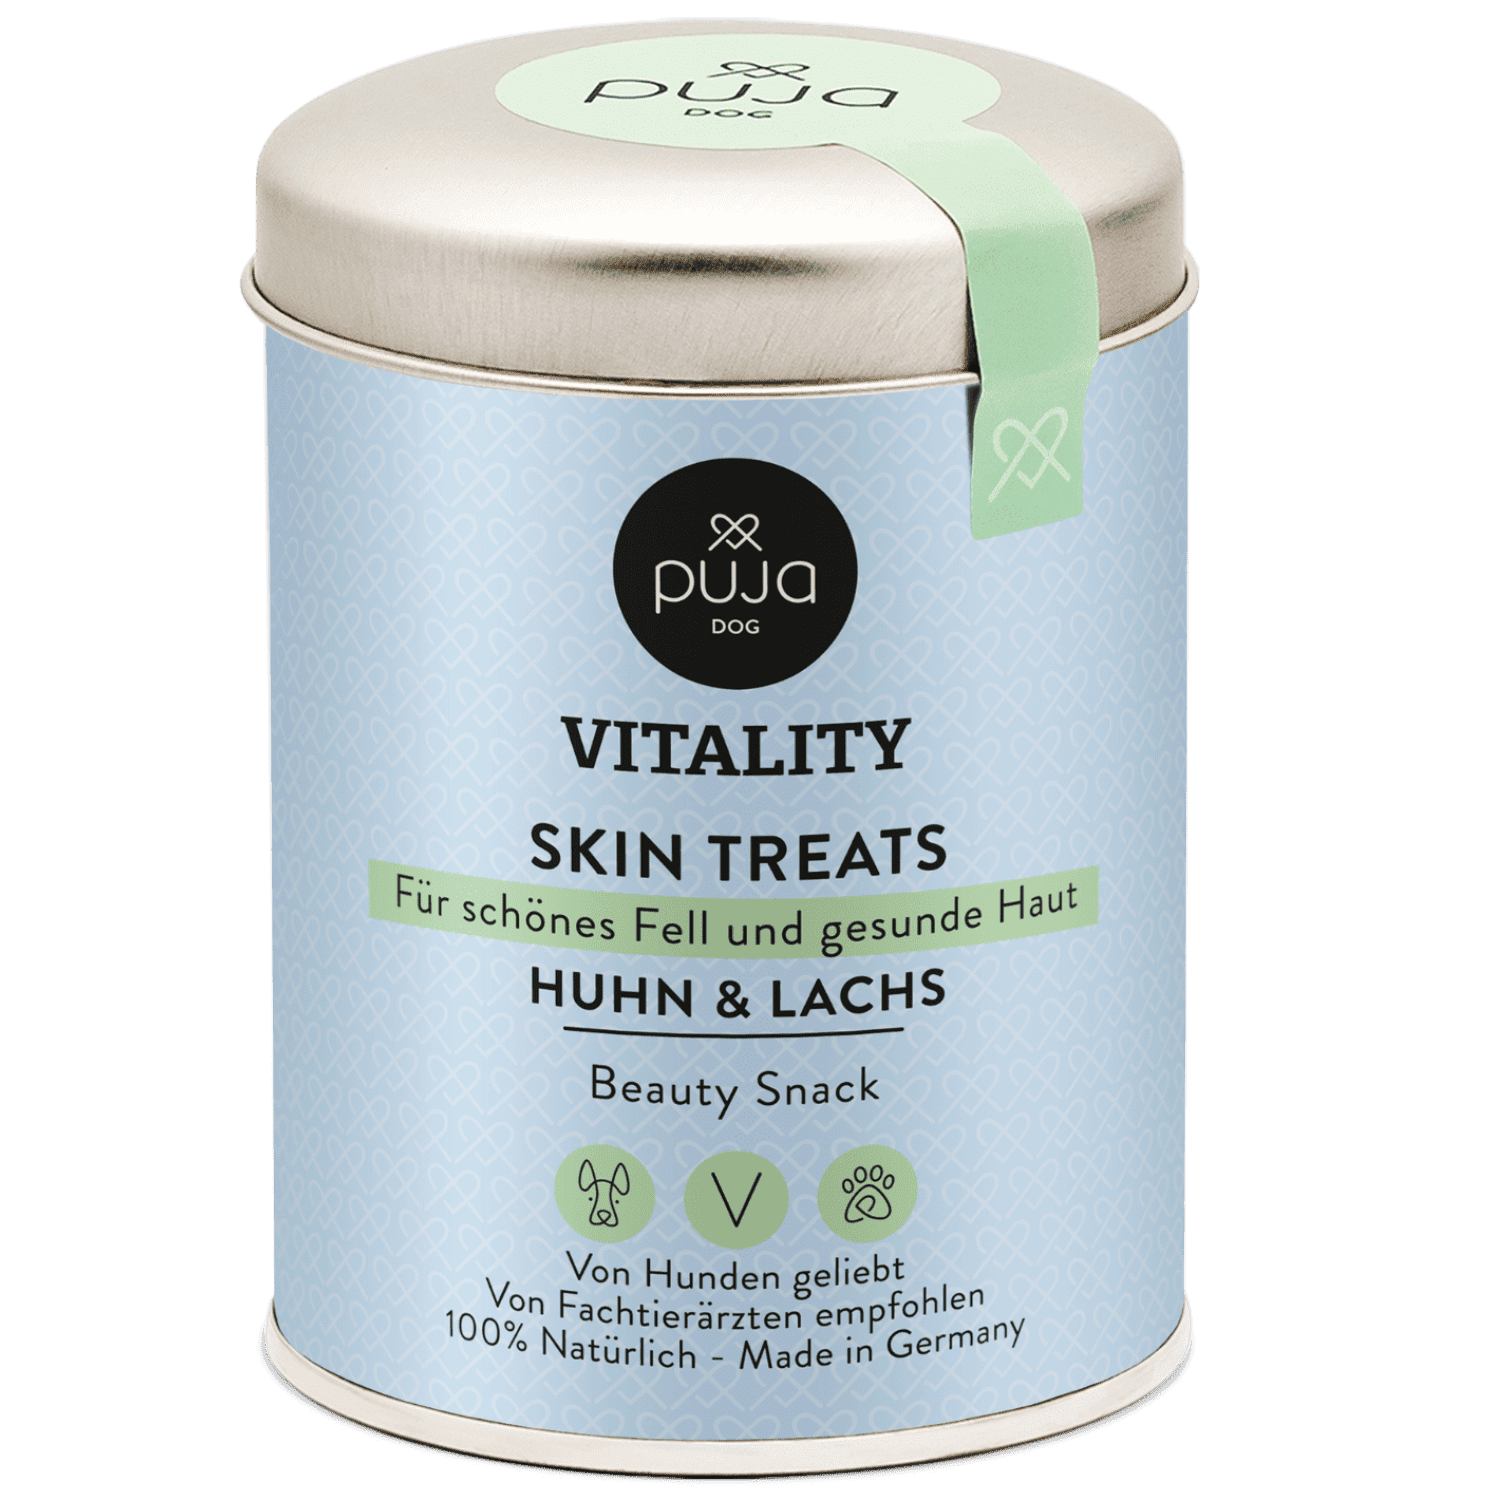 Vitality Skin Treats for dogs - for shiny coat and healthy skin 150g